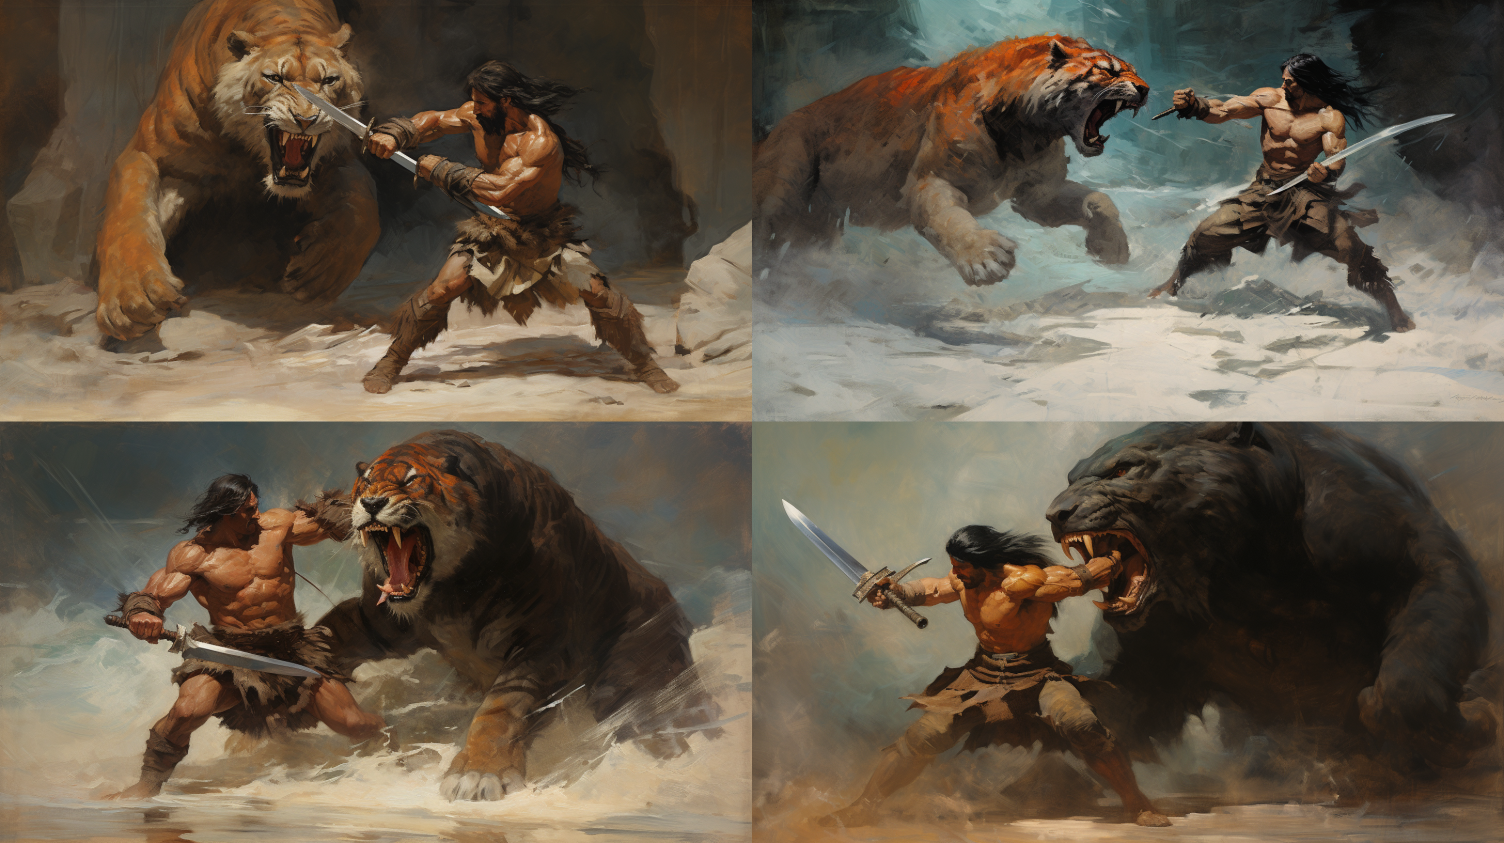 nakomoto_conan_the_barbarian_fight_with_Saber-toothed_tiger_in_ccd96a4b-0cae-4c27-b7ec-34021c2adcb7.png